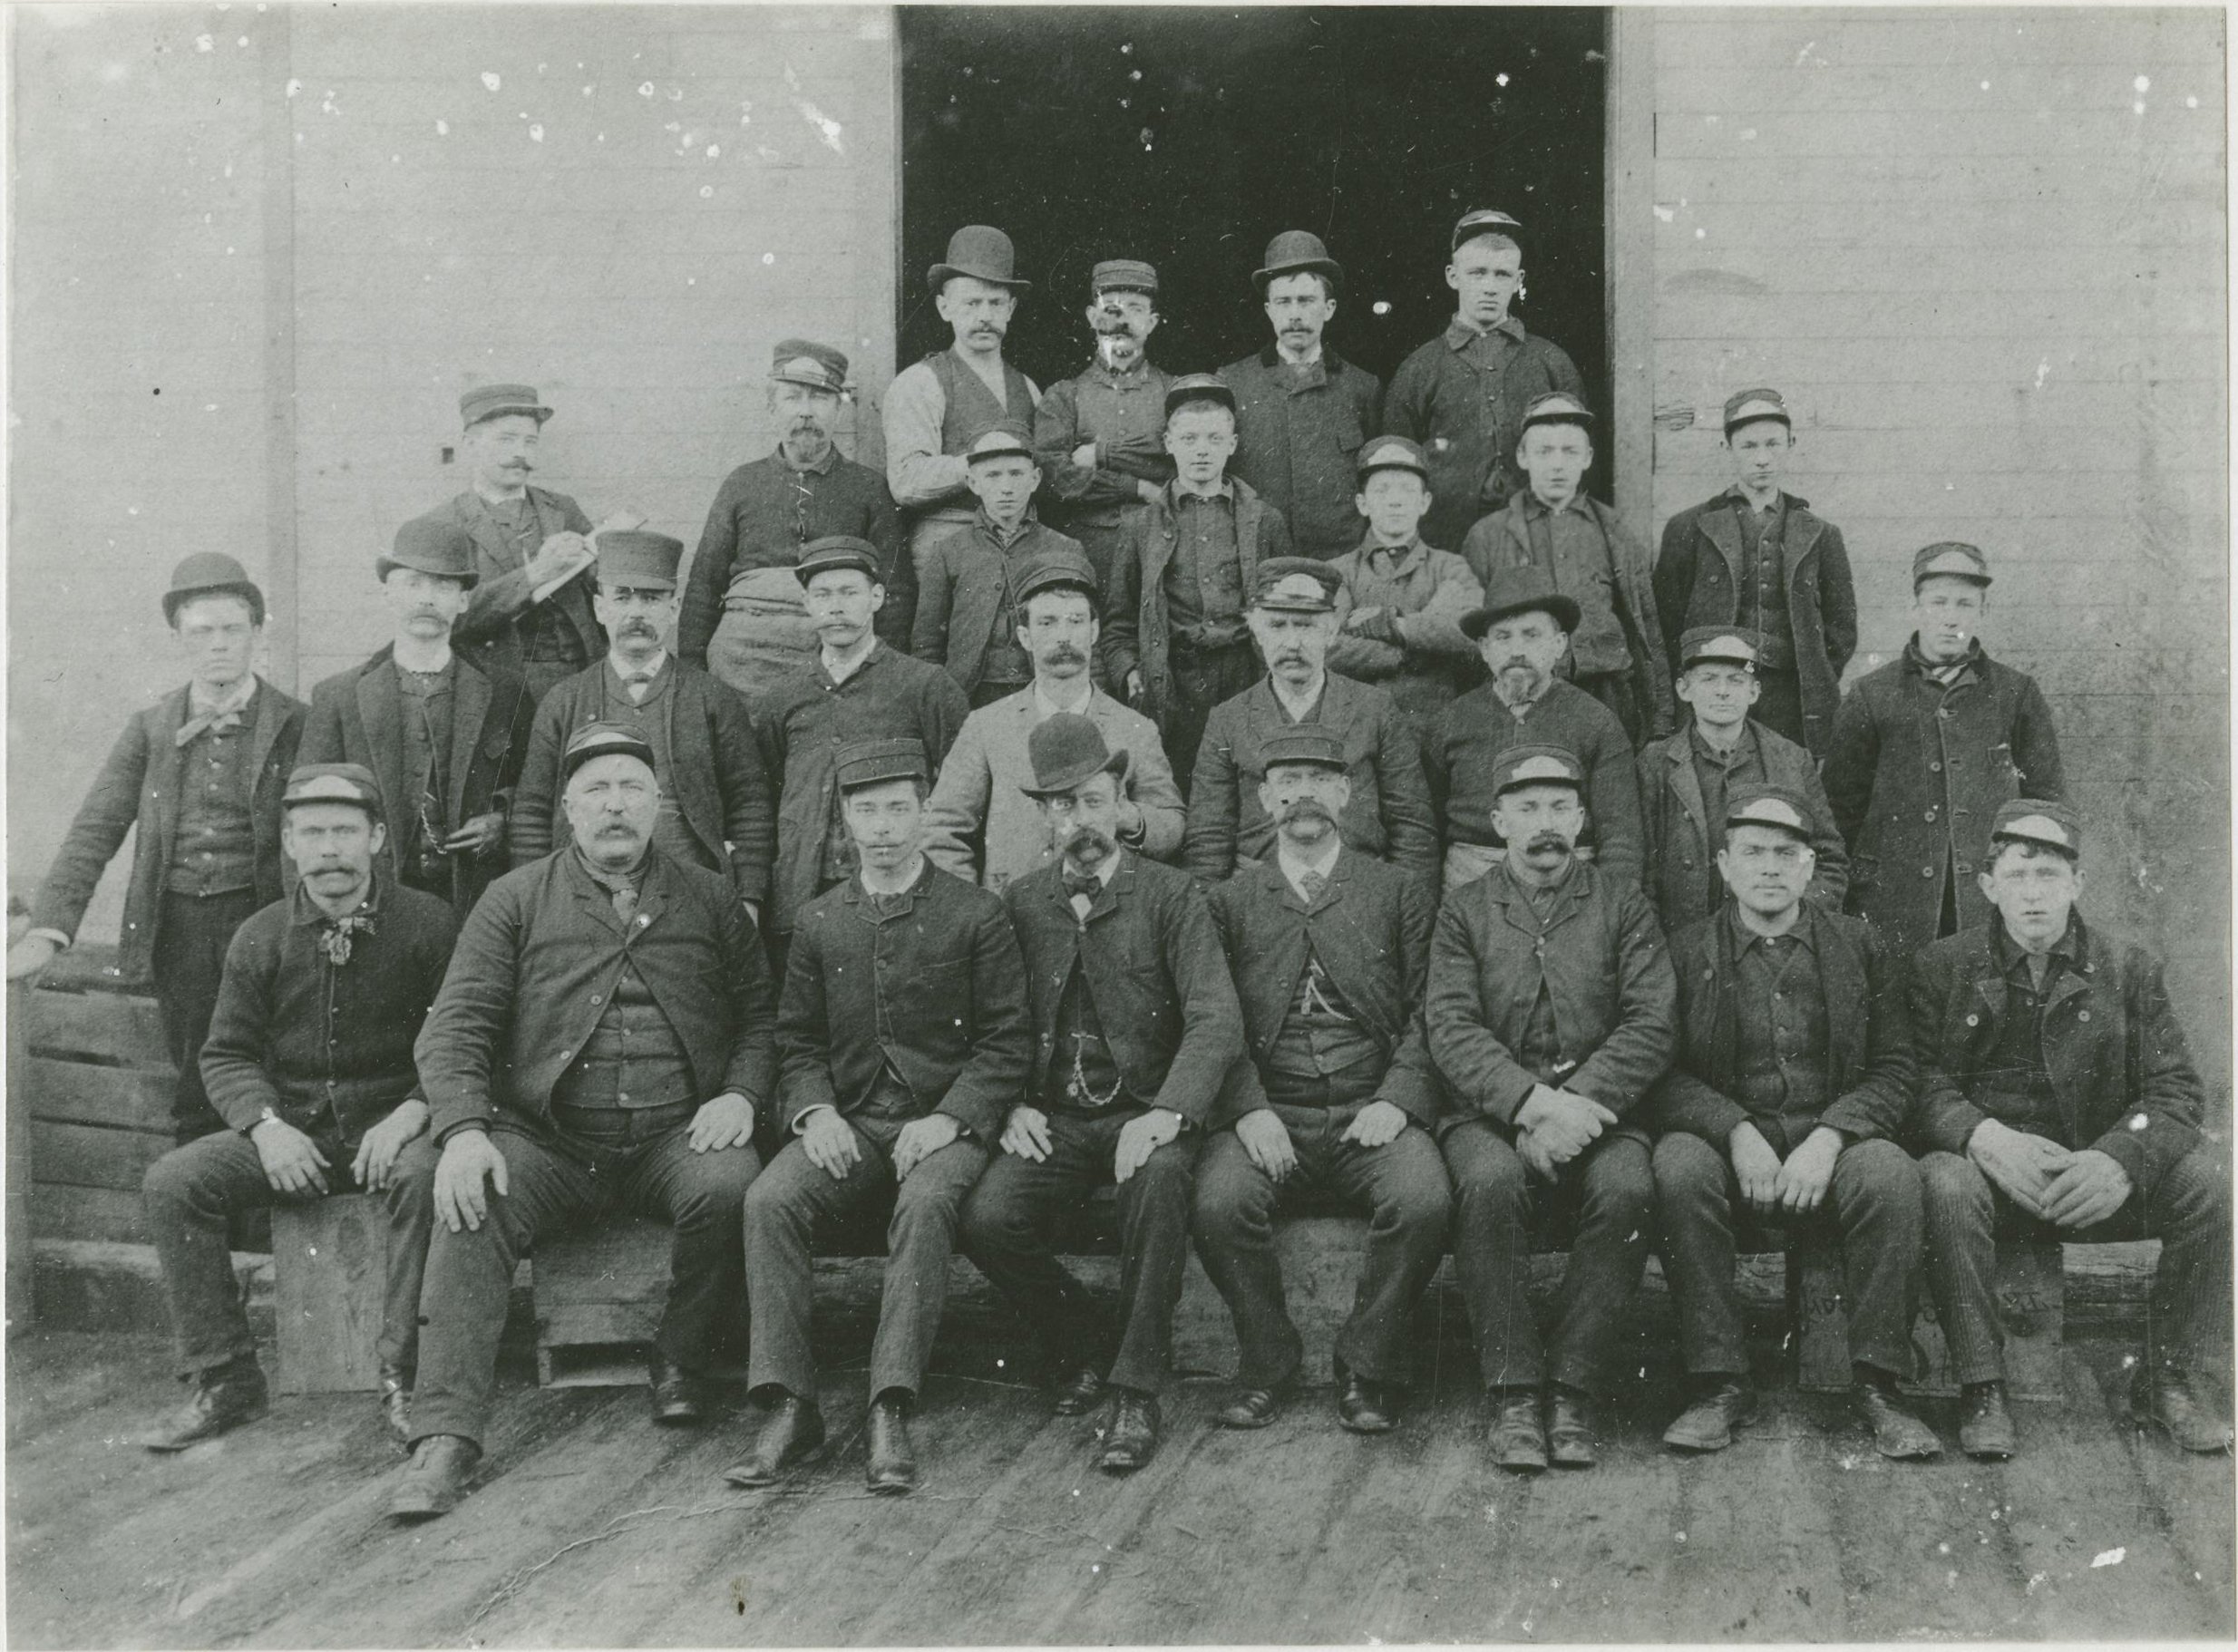  William J. Rugen, Long Island Express Workers.  Gelatin silver print, circa 1890, 1895.  William J. Rugen Image Collection. Queens Borough Public Library, Digital Collection. 